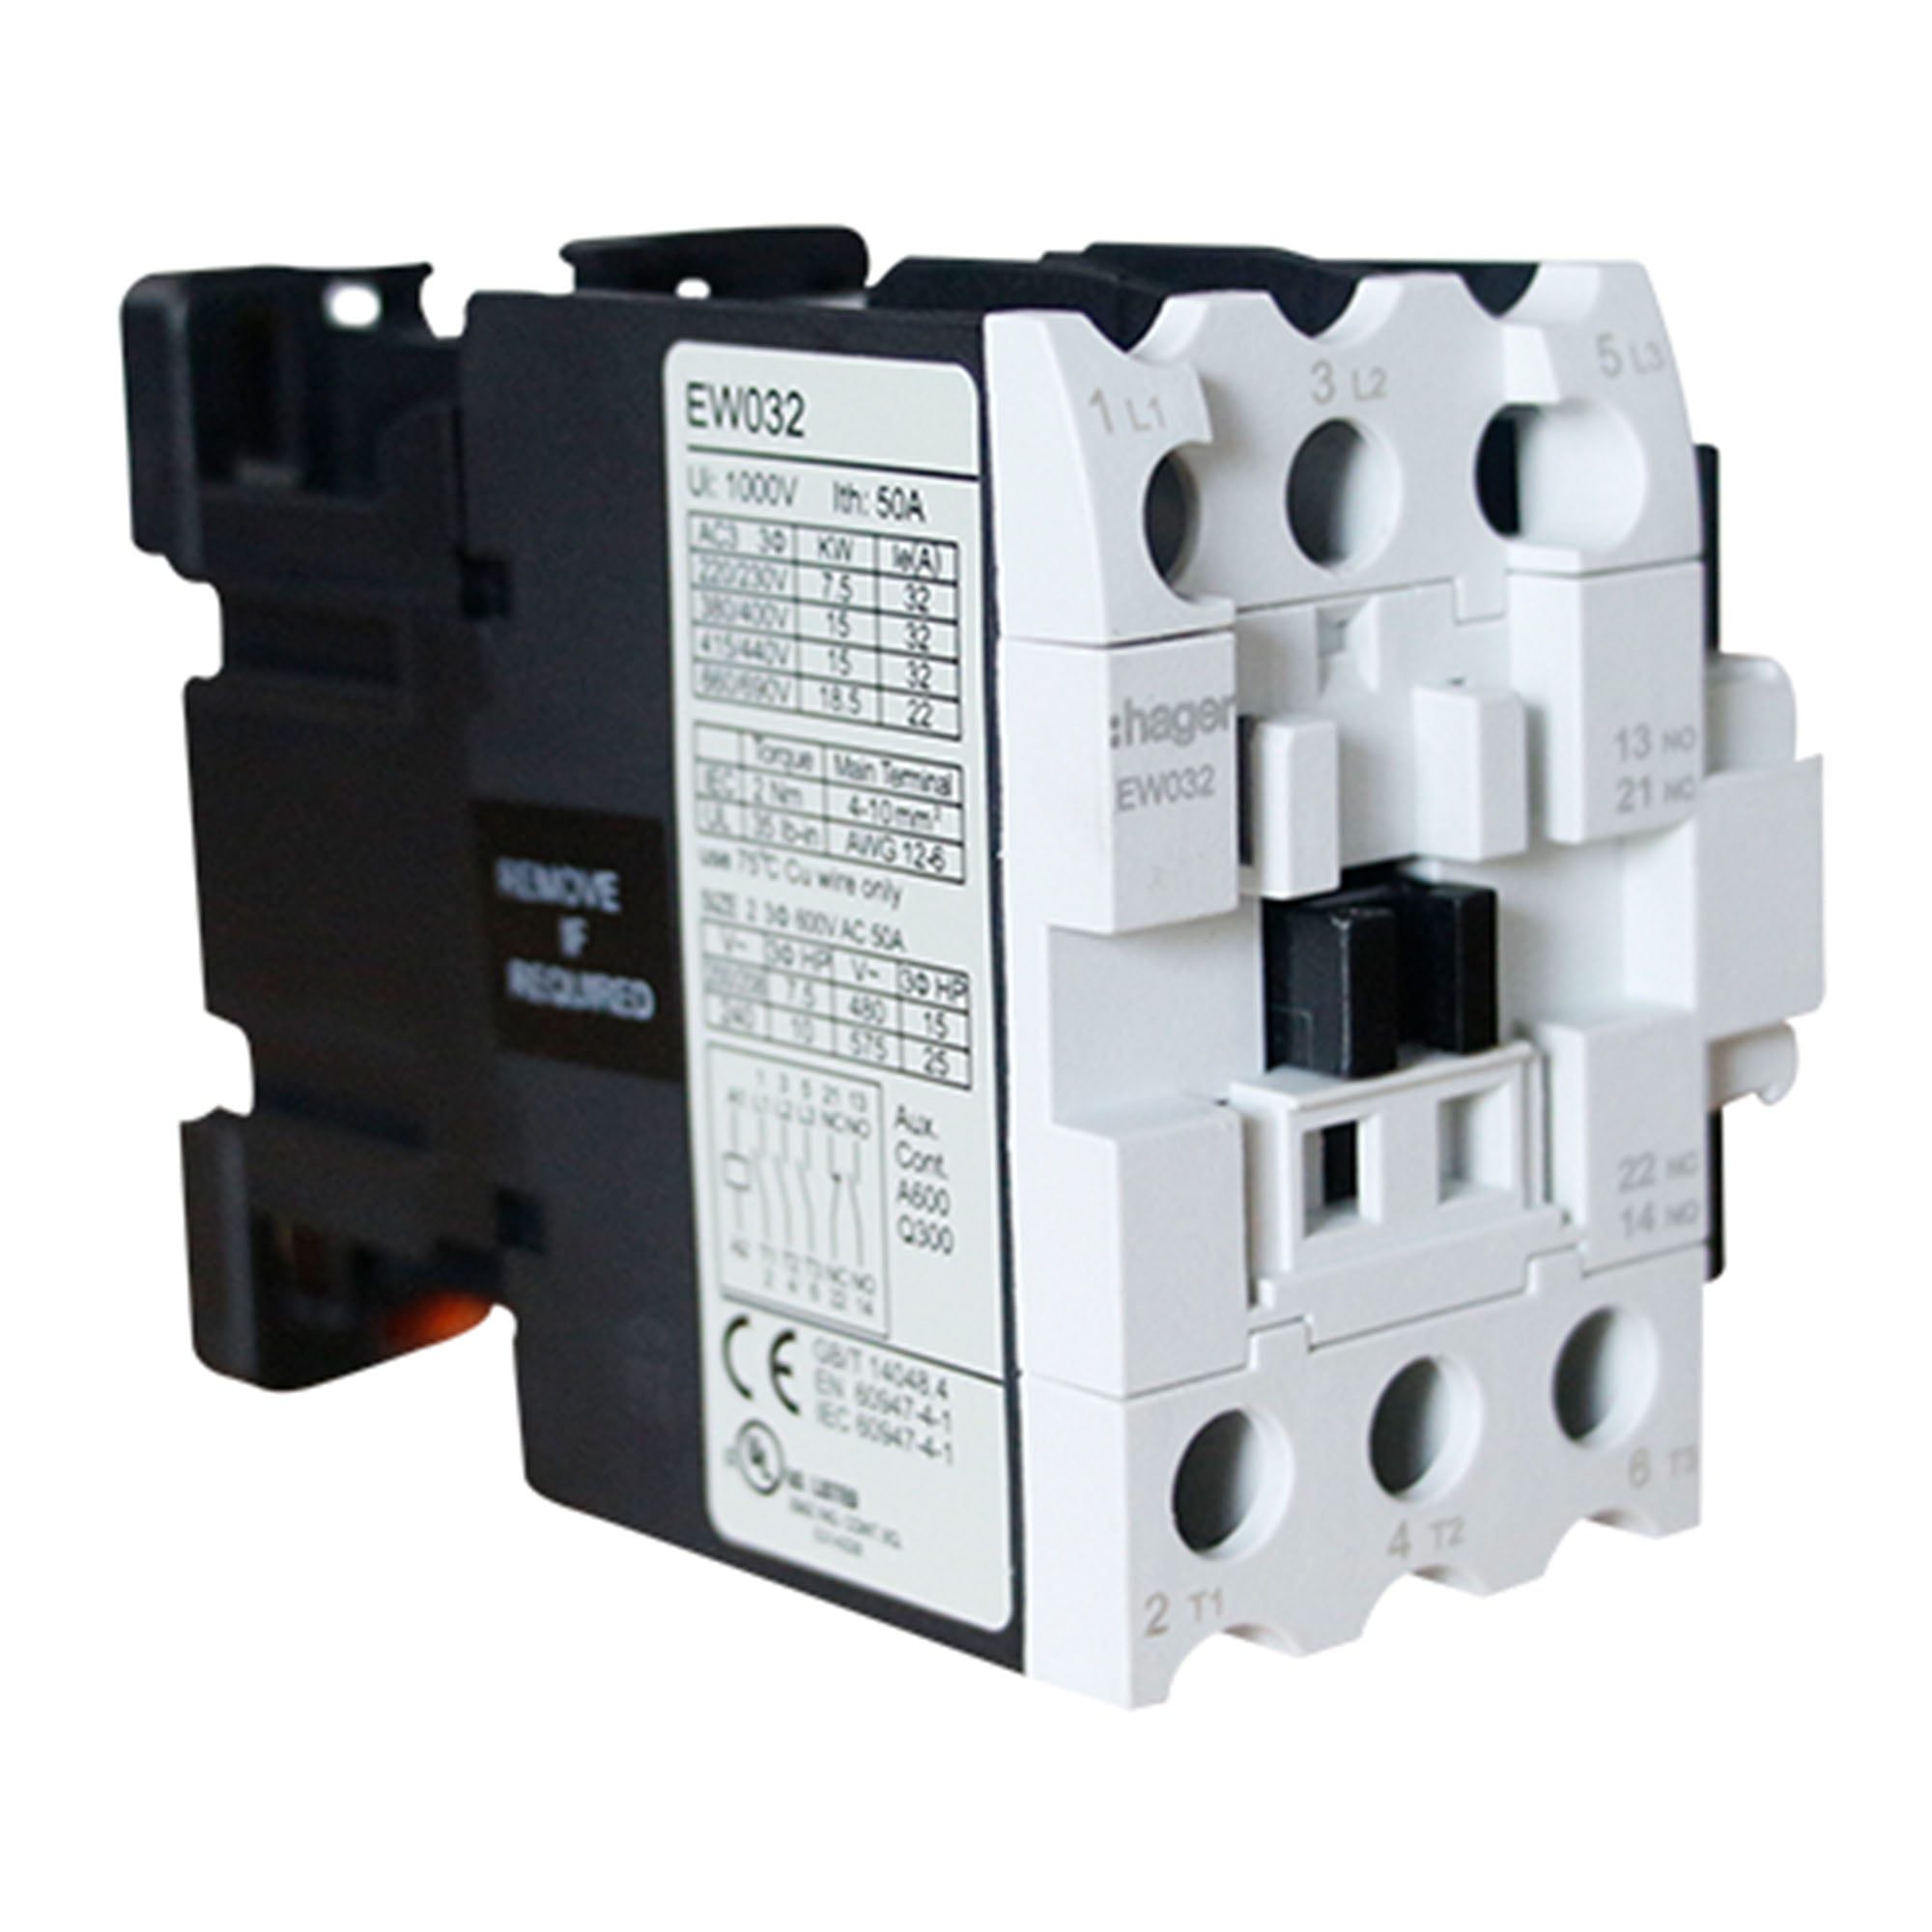 TOMA EMPOTRABLE 32AMP 3P+T 250V AZUL 9H IP67